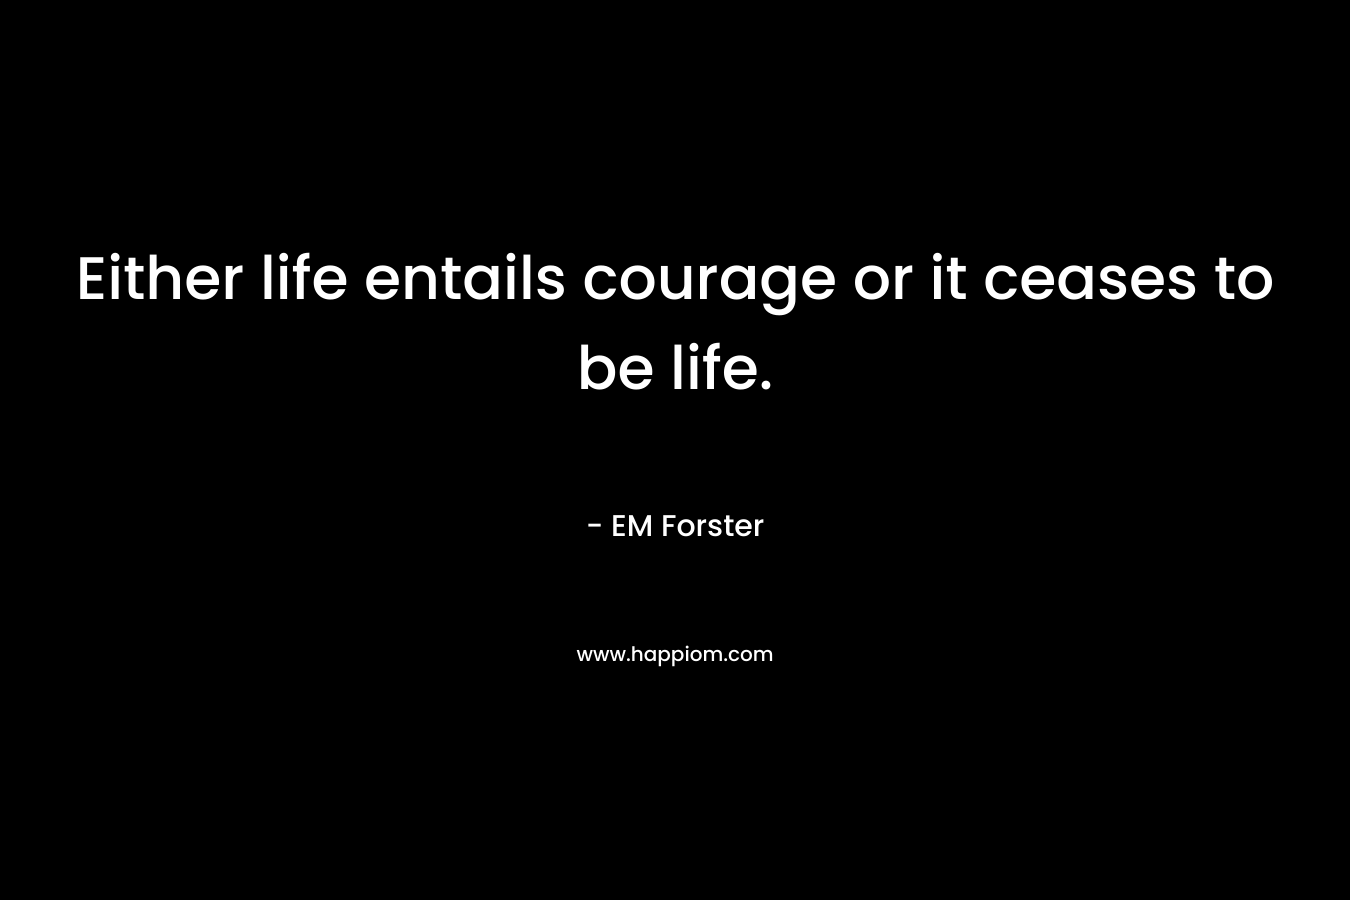 Either life entails courage or it ceases to be life. – EM Forster